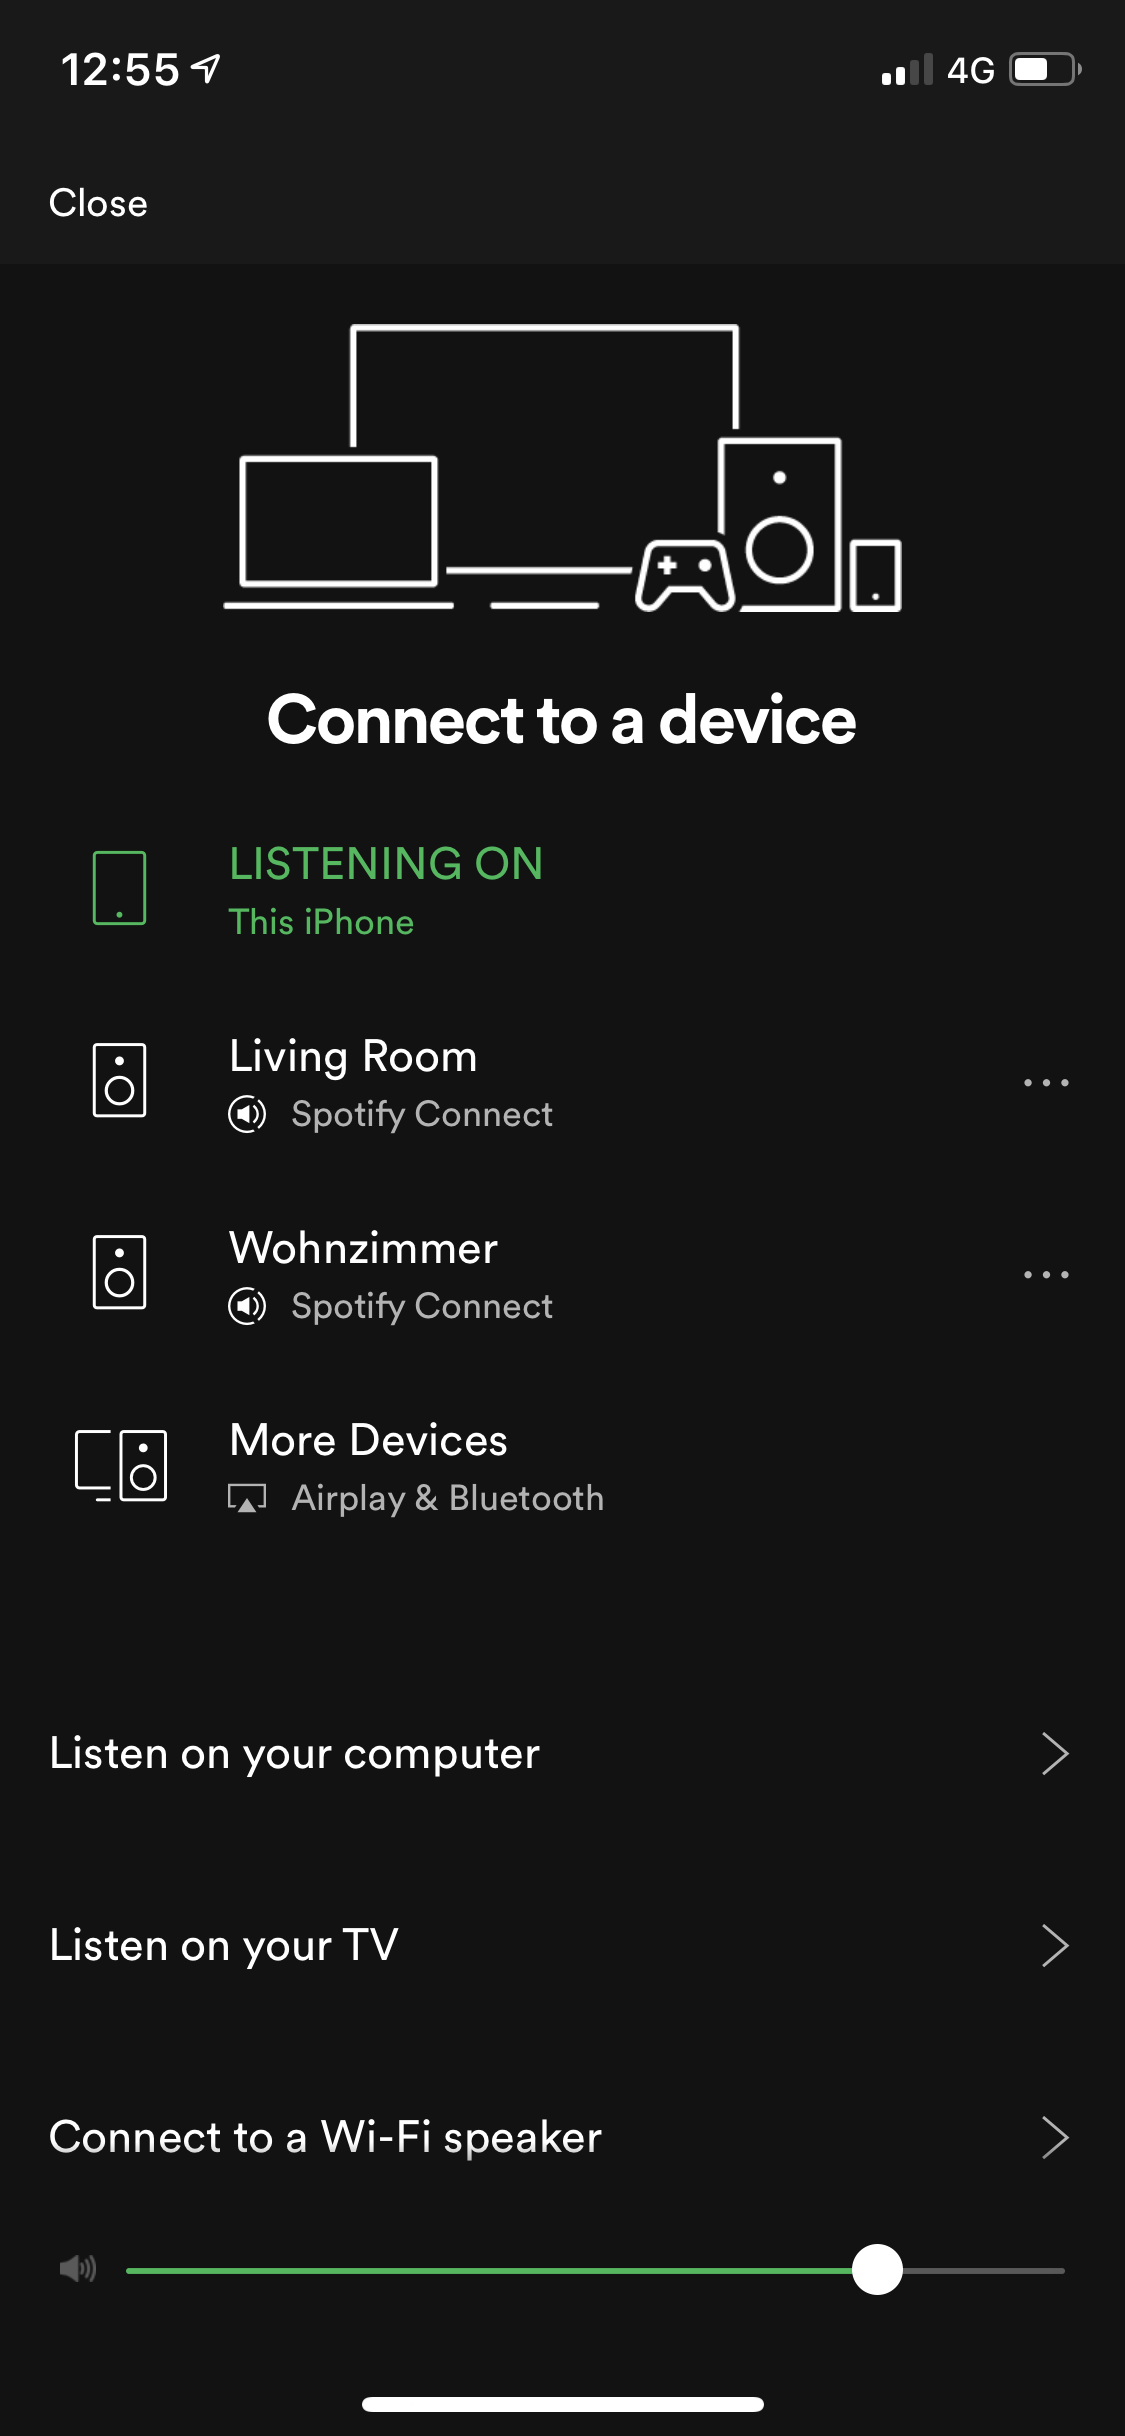 sonos not showing up in spotify connect Sonos Community